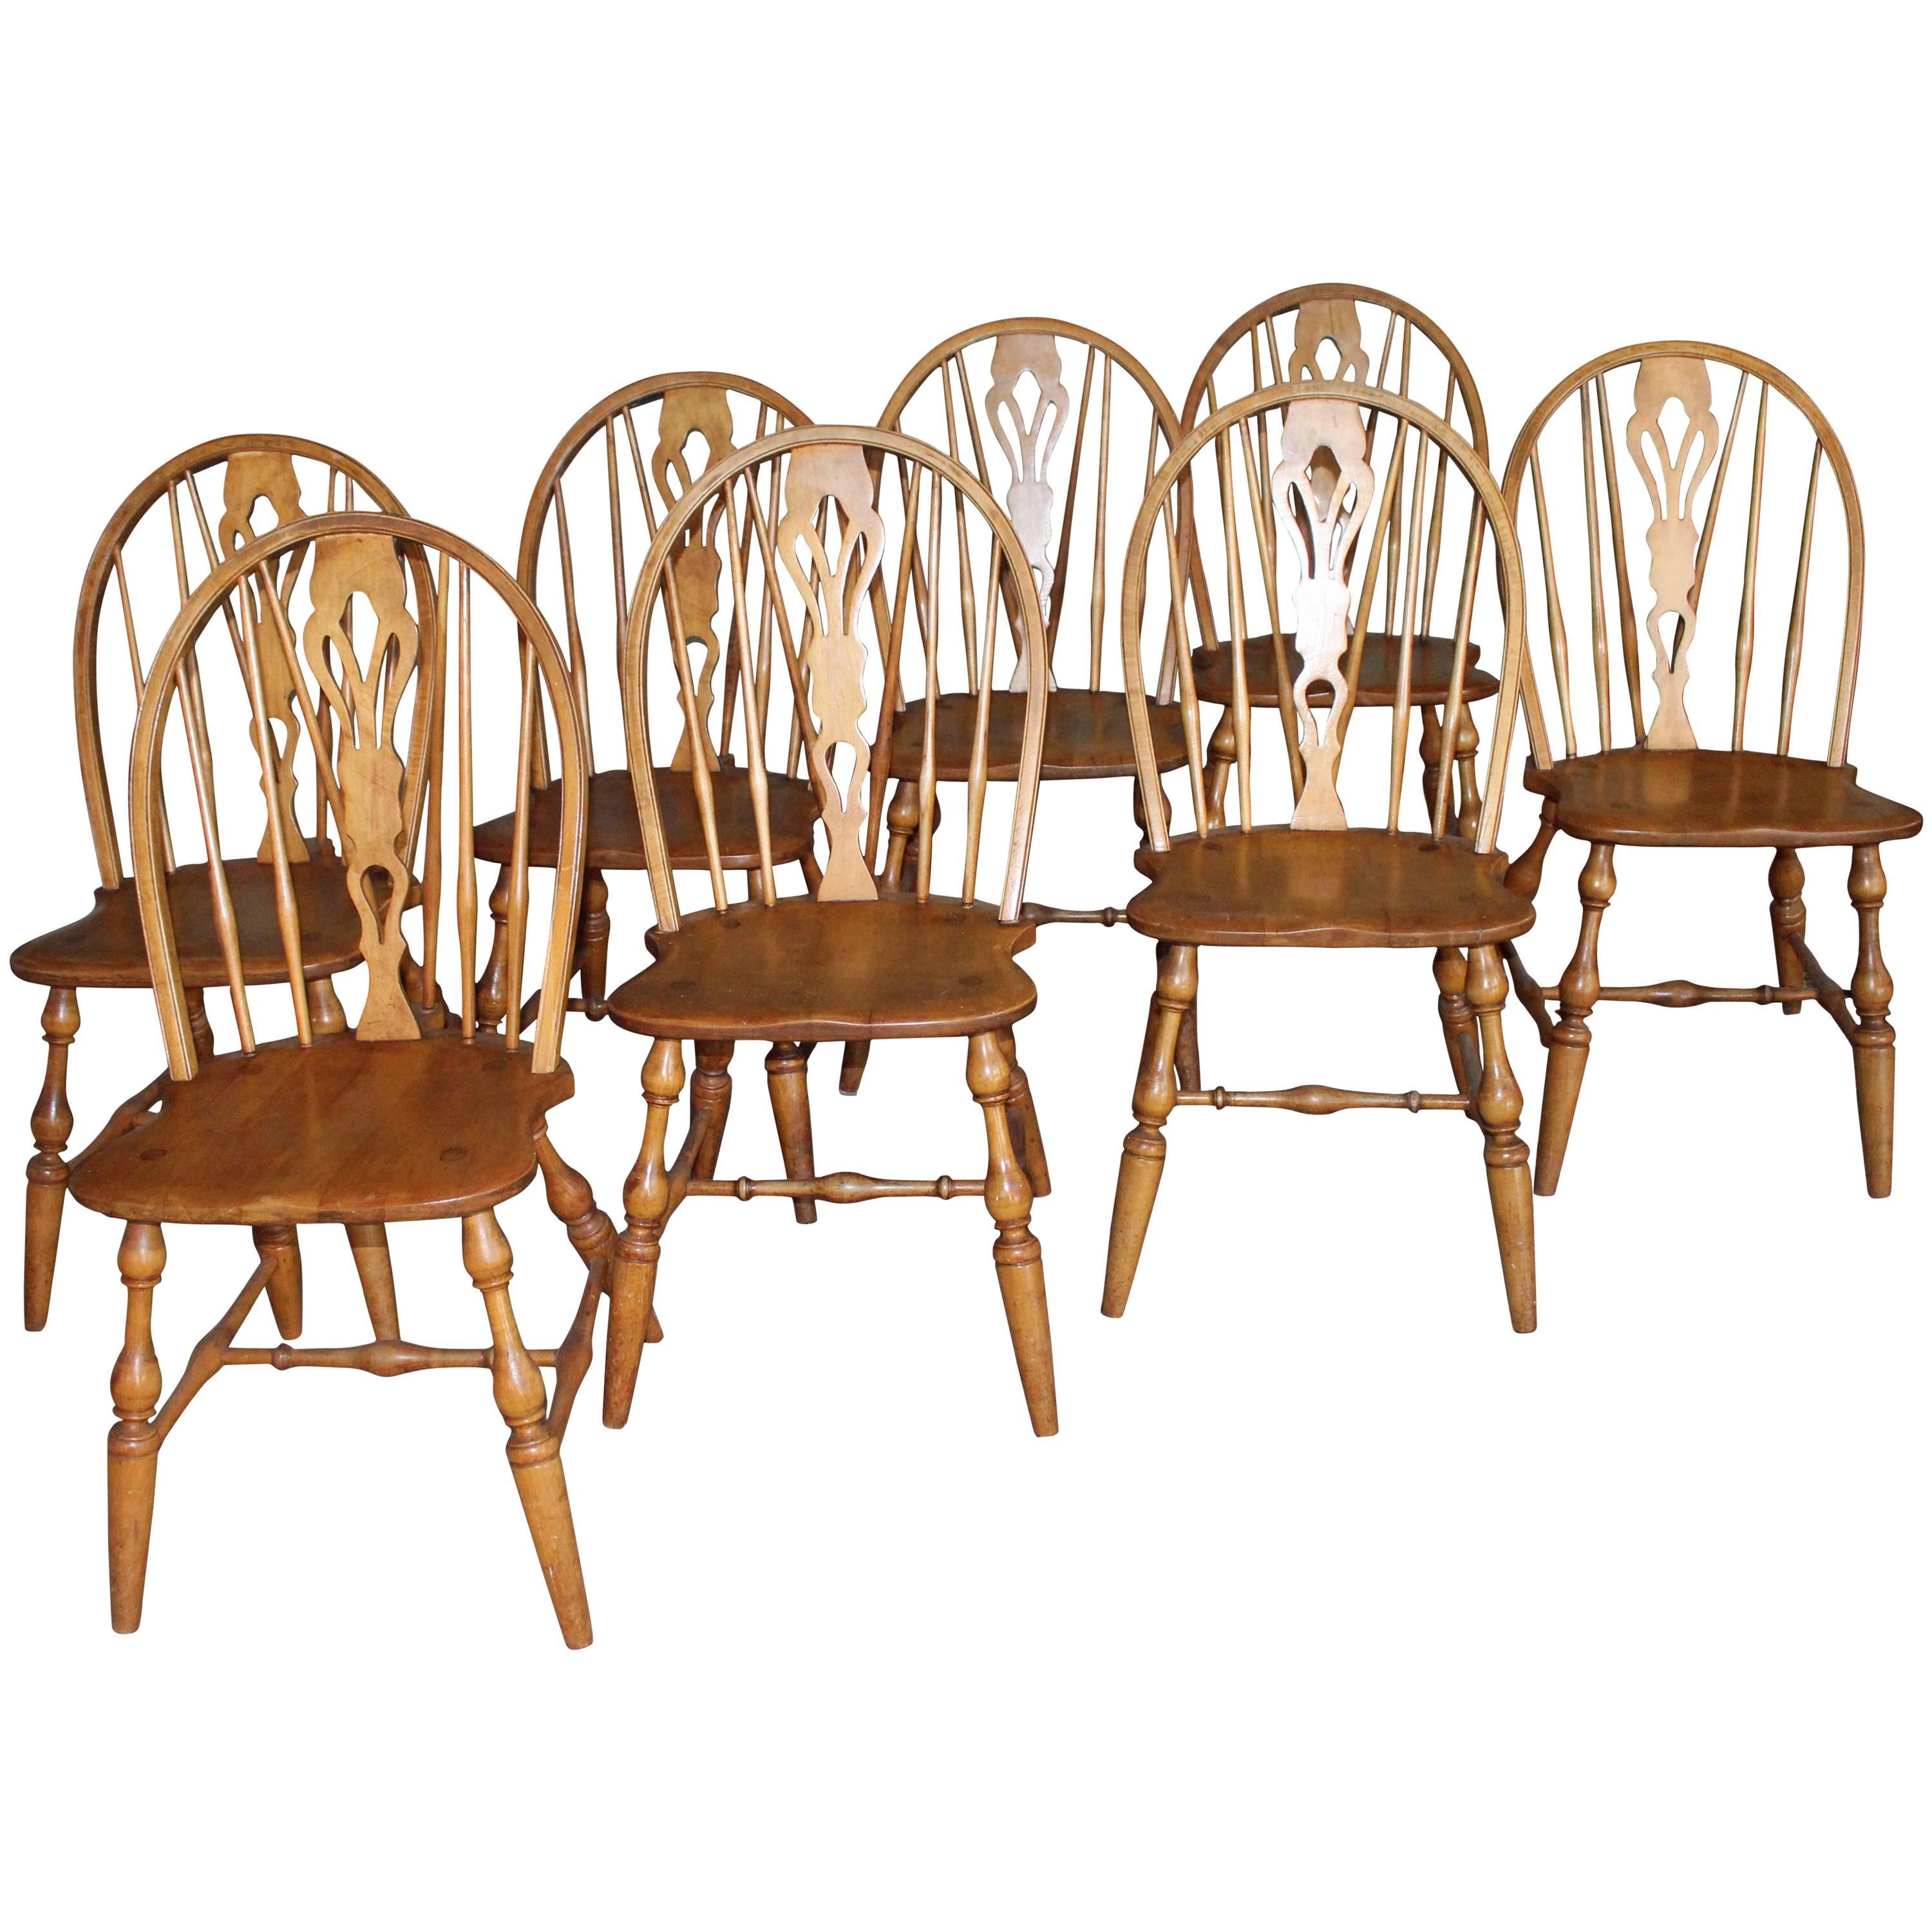 English Windsor Bow-Brace Back Dining Chairs with Decorative Splat